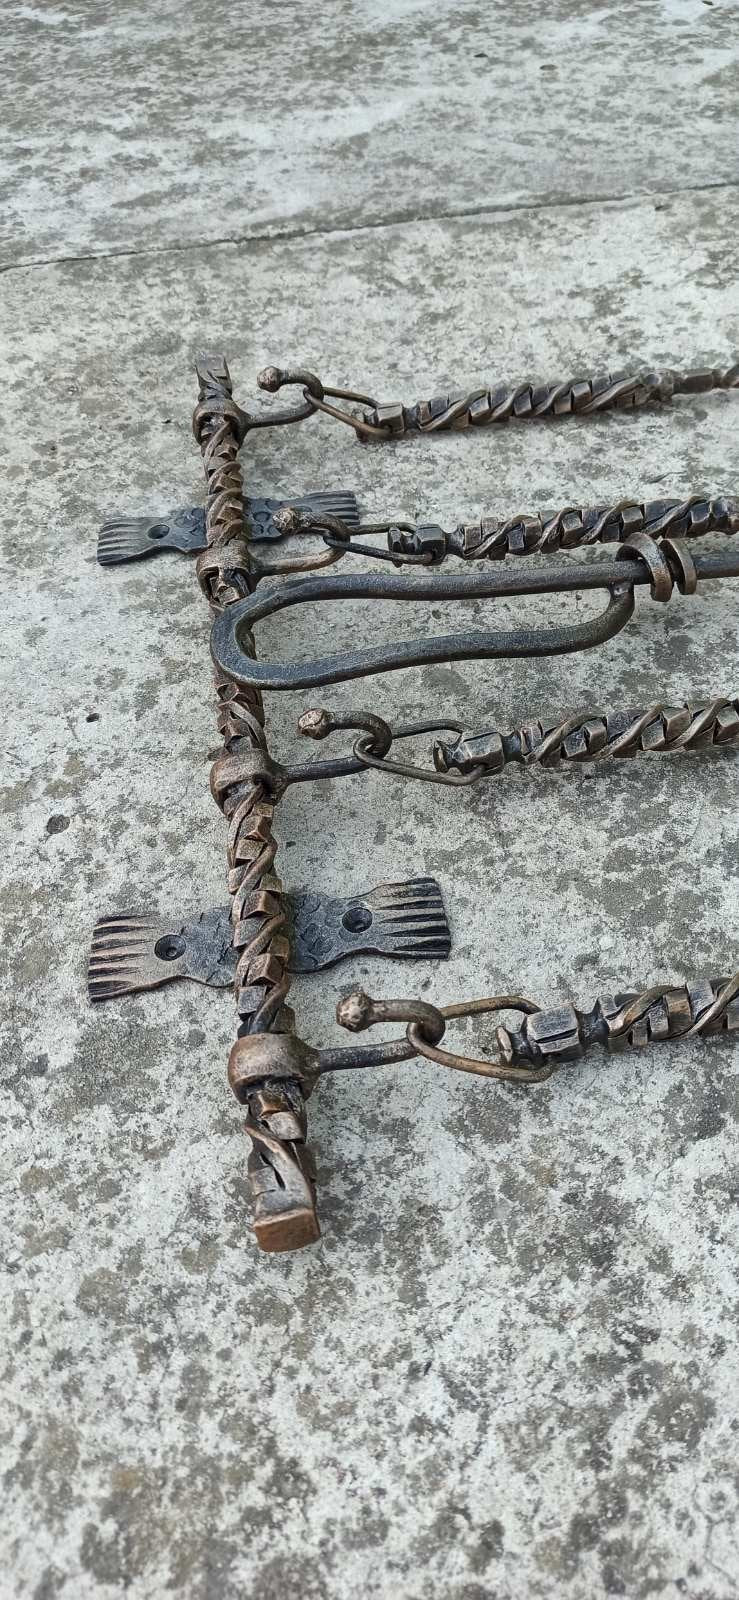 Fireplace tools, fireplace, fire poker, BBQ, grill, medieval decor, medieval tools, gift set, iron gift, anniversary, birthday, steel gift